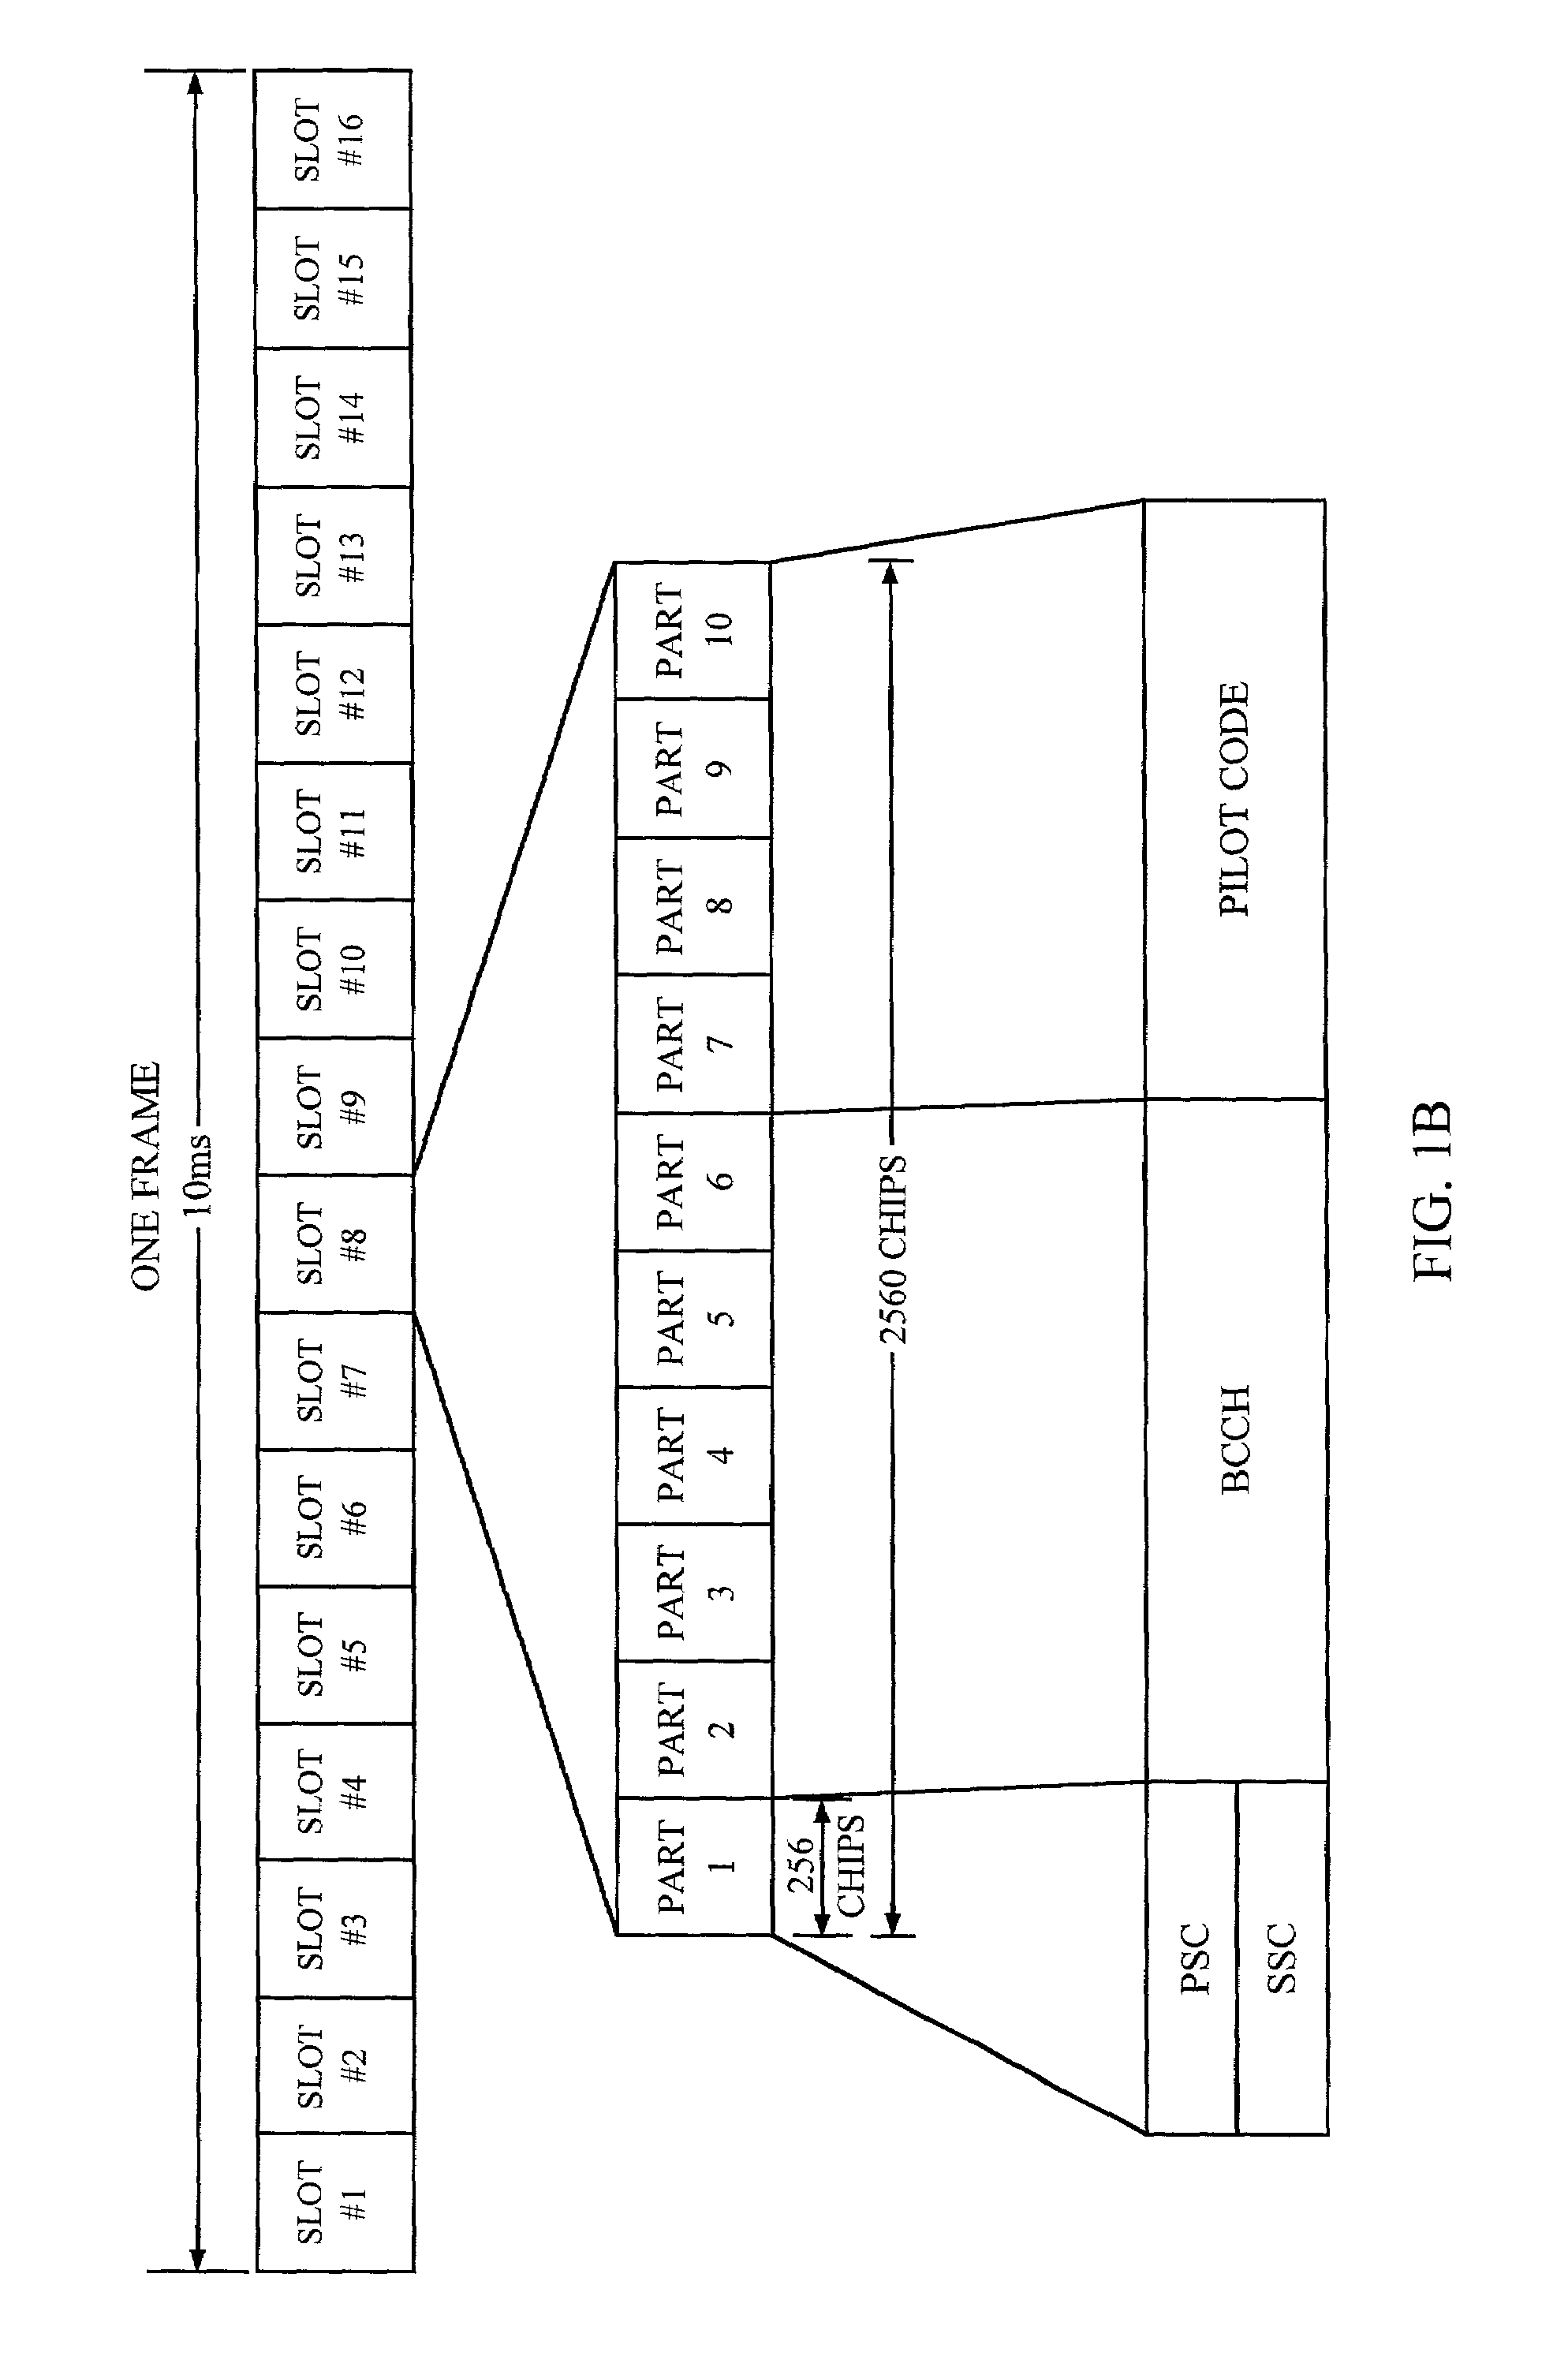 Method and system for handoff between an asychronous CDMA base station and a synchronous CDMA base station